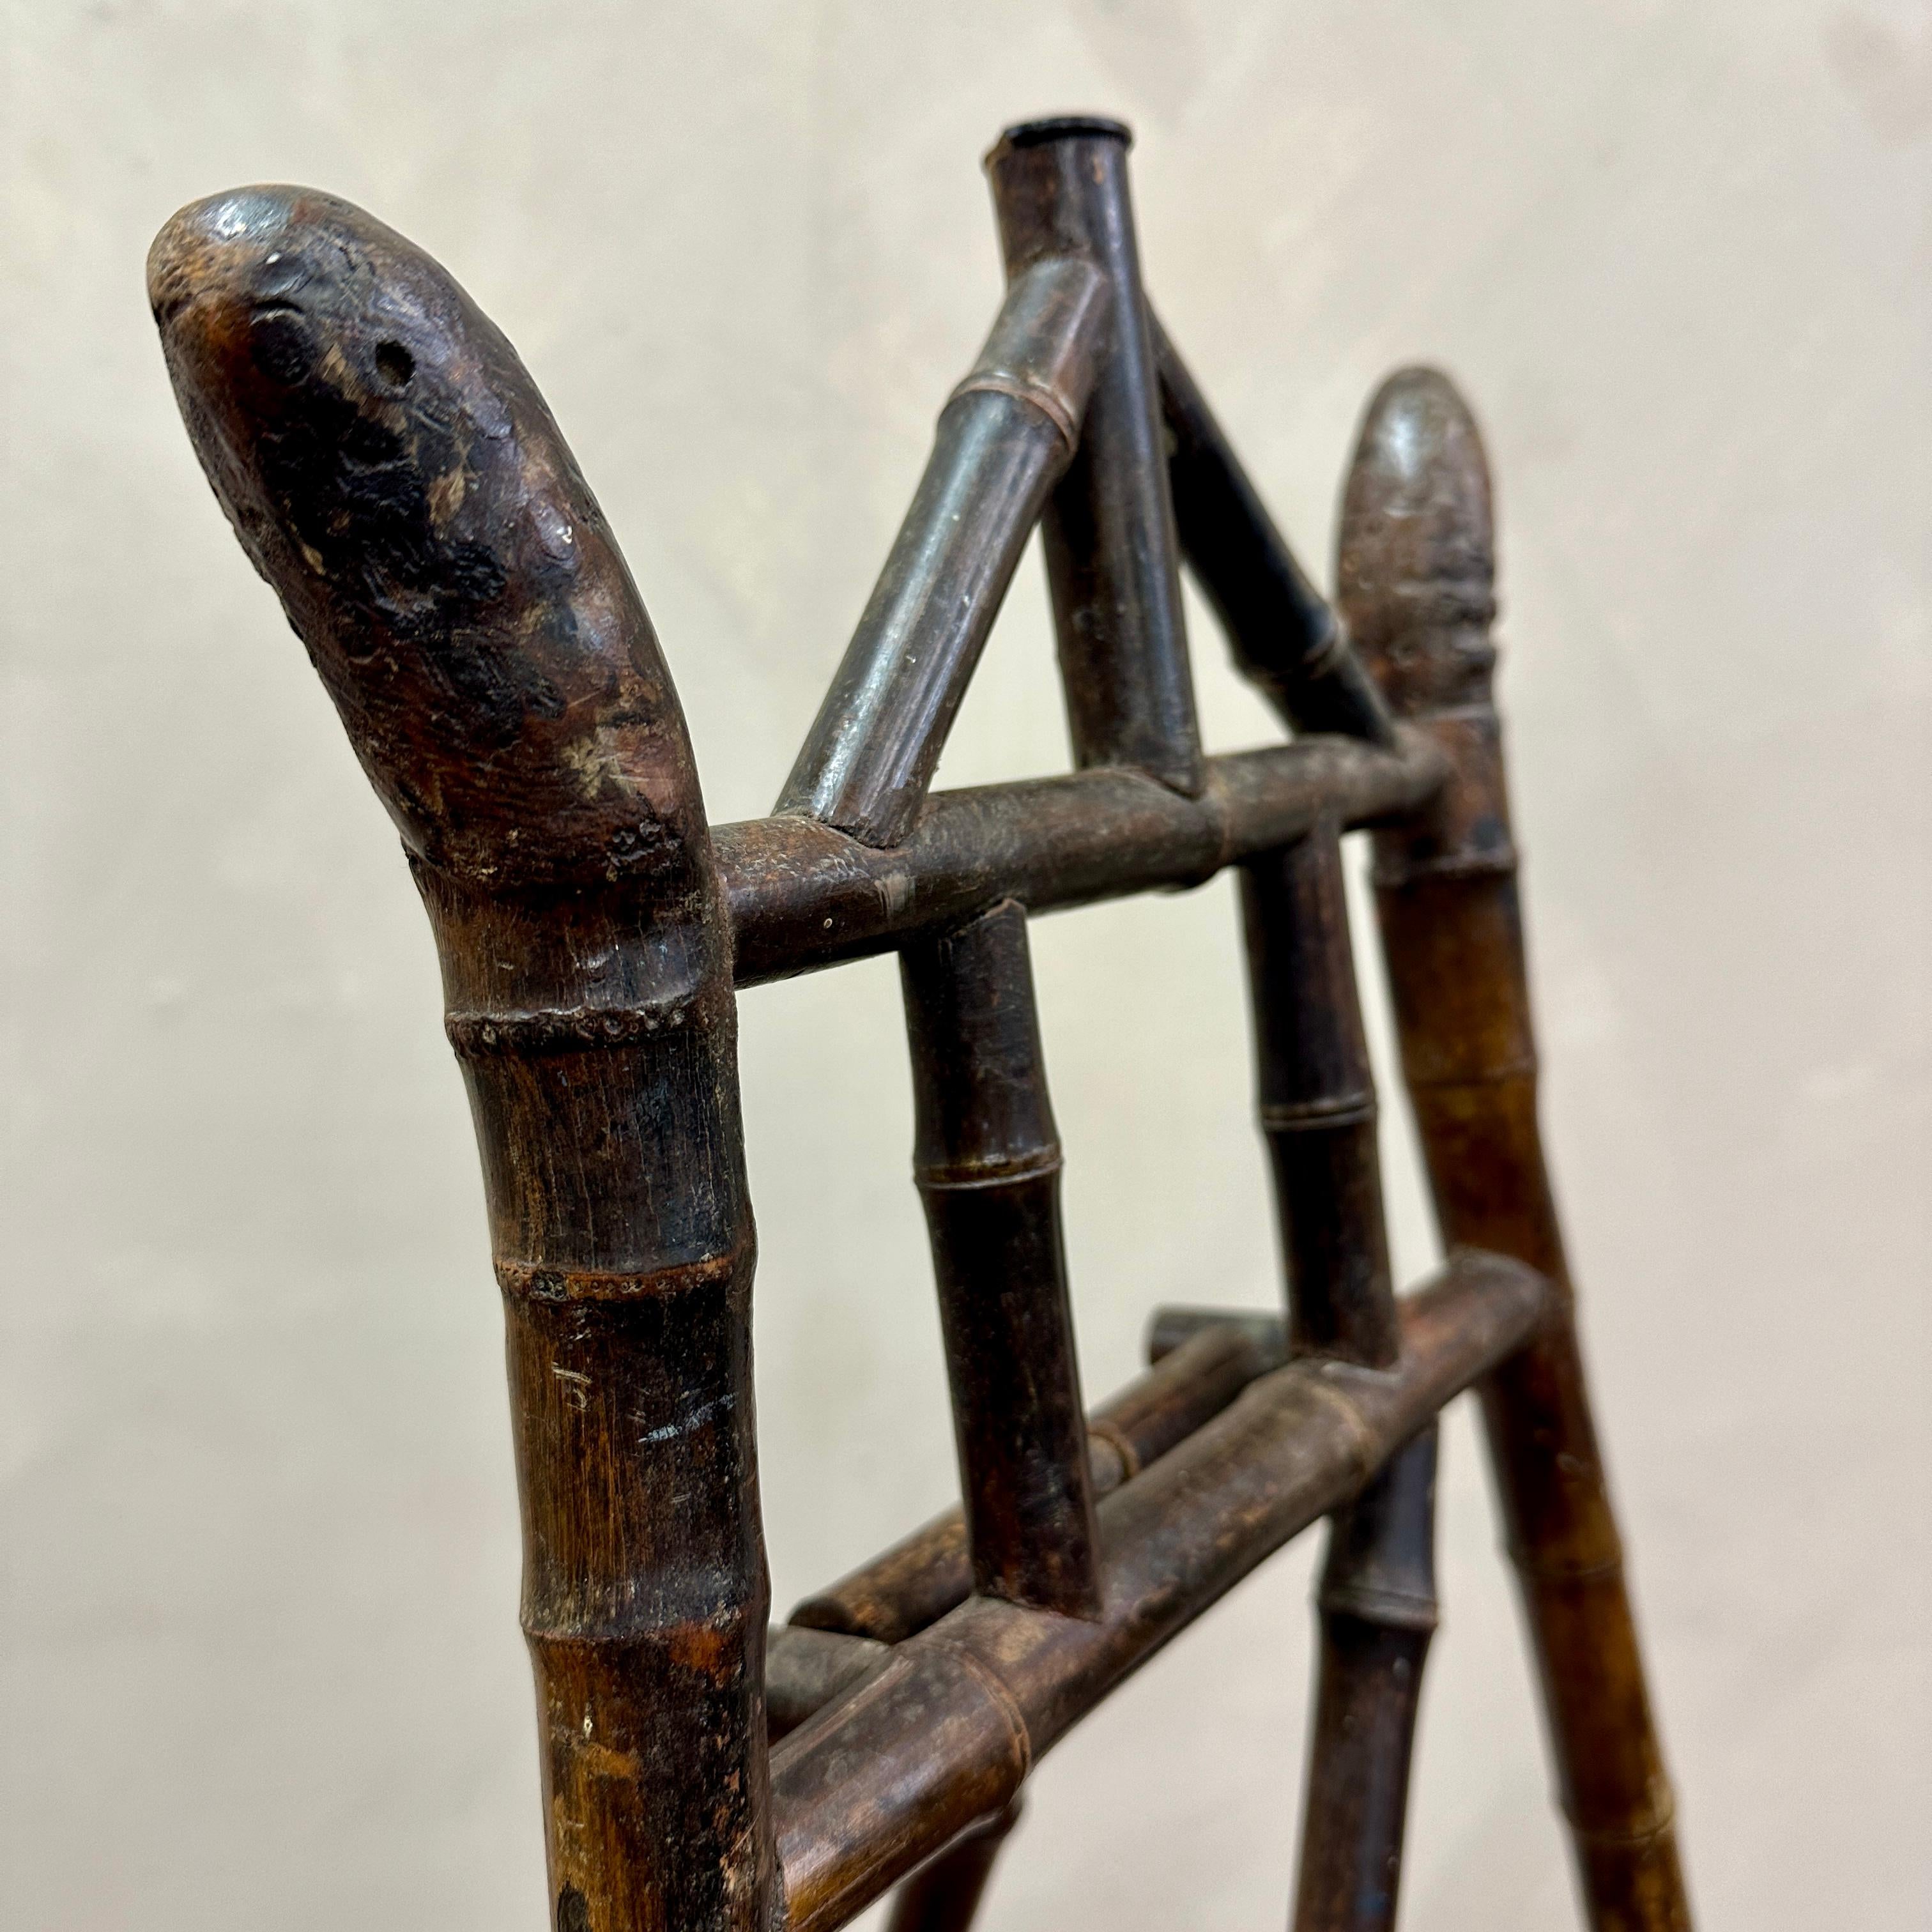 Decorative Bamboo Display Easel.
With supporting chain.
England, circa 1900.
Height: 132cm, Width: 59cm, Depth: 68cm.

Please message if any further info or photos are required 

We are happy to work with you with your choice of shipping 
or we can